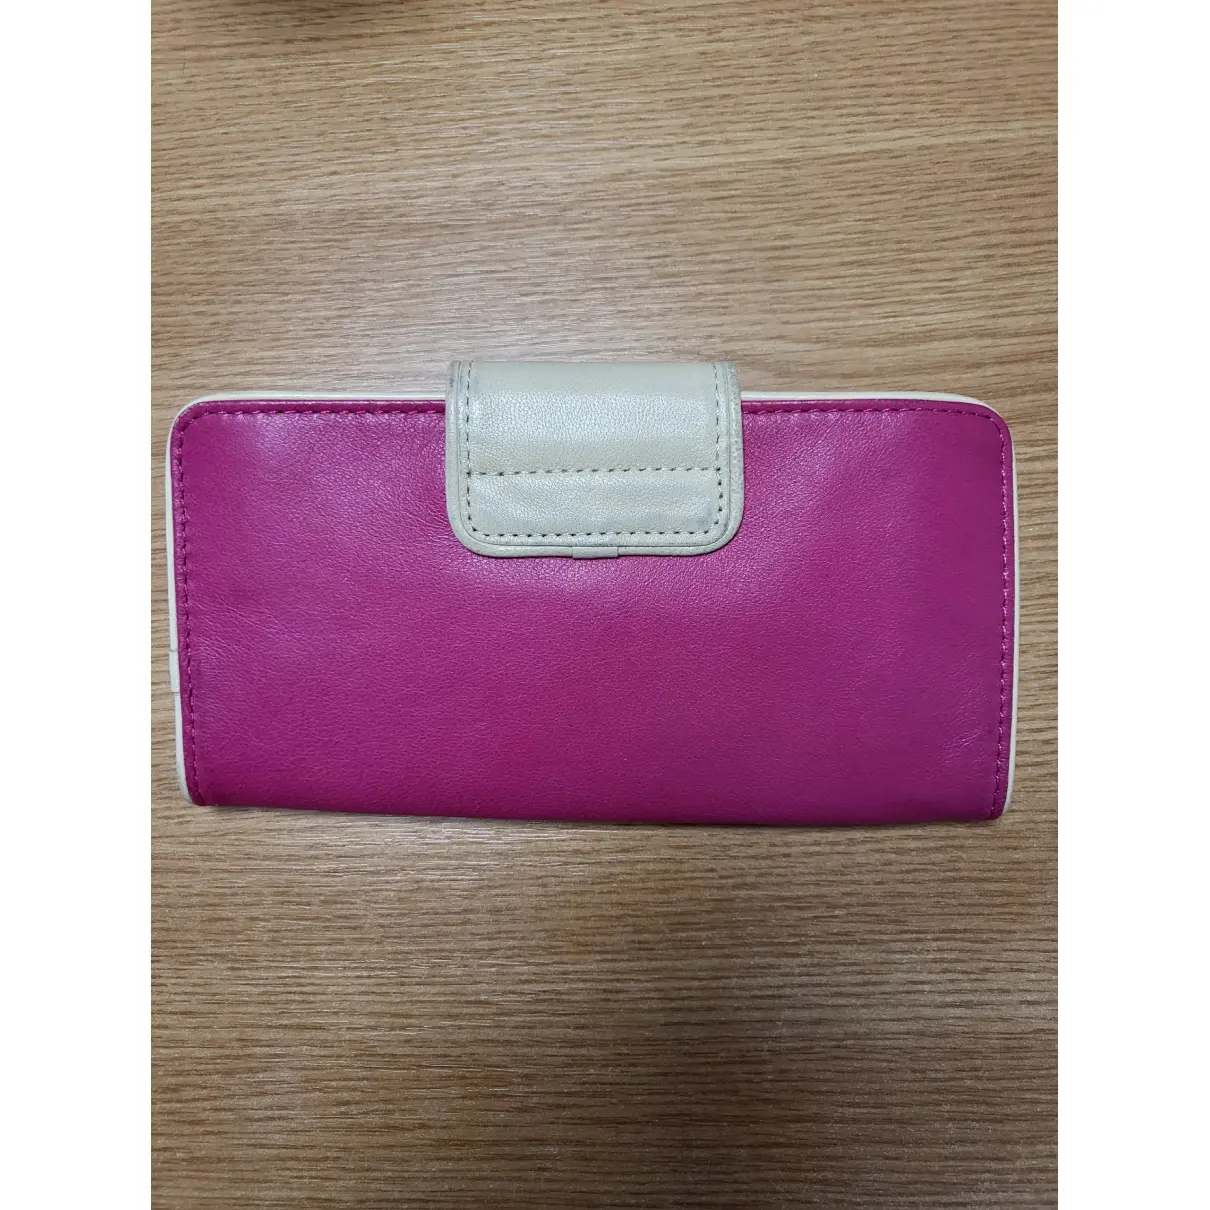 Buy Juicy Couture Leather wallet online